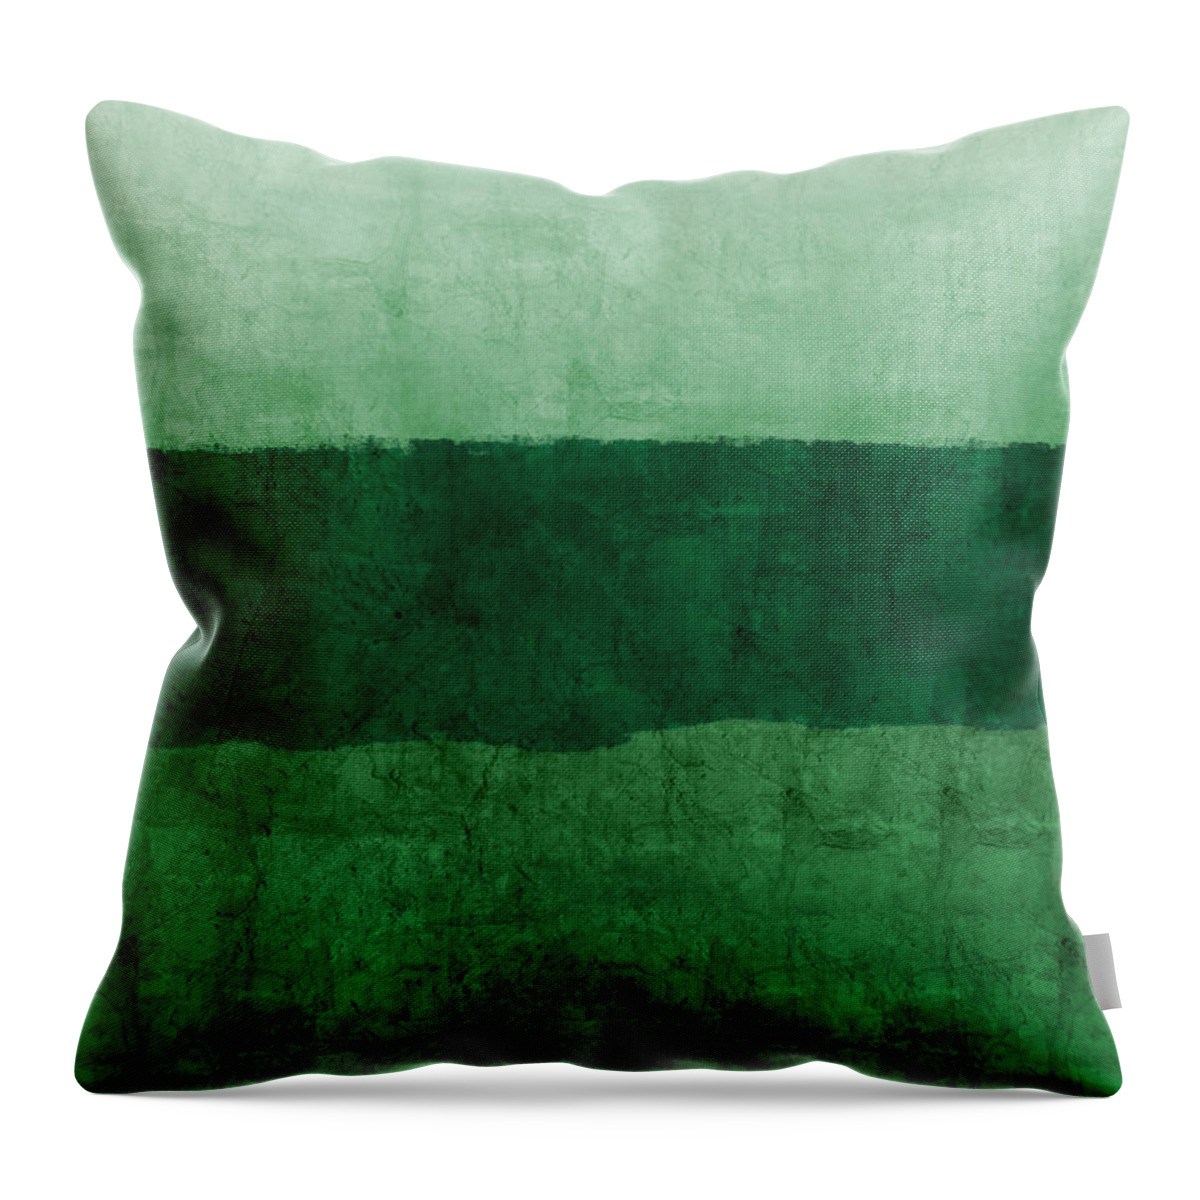 Green Vert Verde Lanscape Abstract Landscapecontemporary Large Loft Art Wide Painting Home Decorairbnb Decorliving Room Artdeep Dark Colourful Bedroom Artcorporate Artset Designgallery Wallart By Linda Woodsart For Interior Designersgreeting Cardpillowtotehospitality Arthotel Artart Licensing Throw Pillow featuring the painting Verde Landscape 1- Art by Linda Woods by Linda Woods